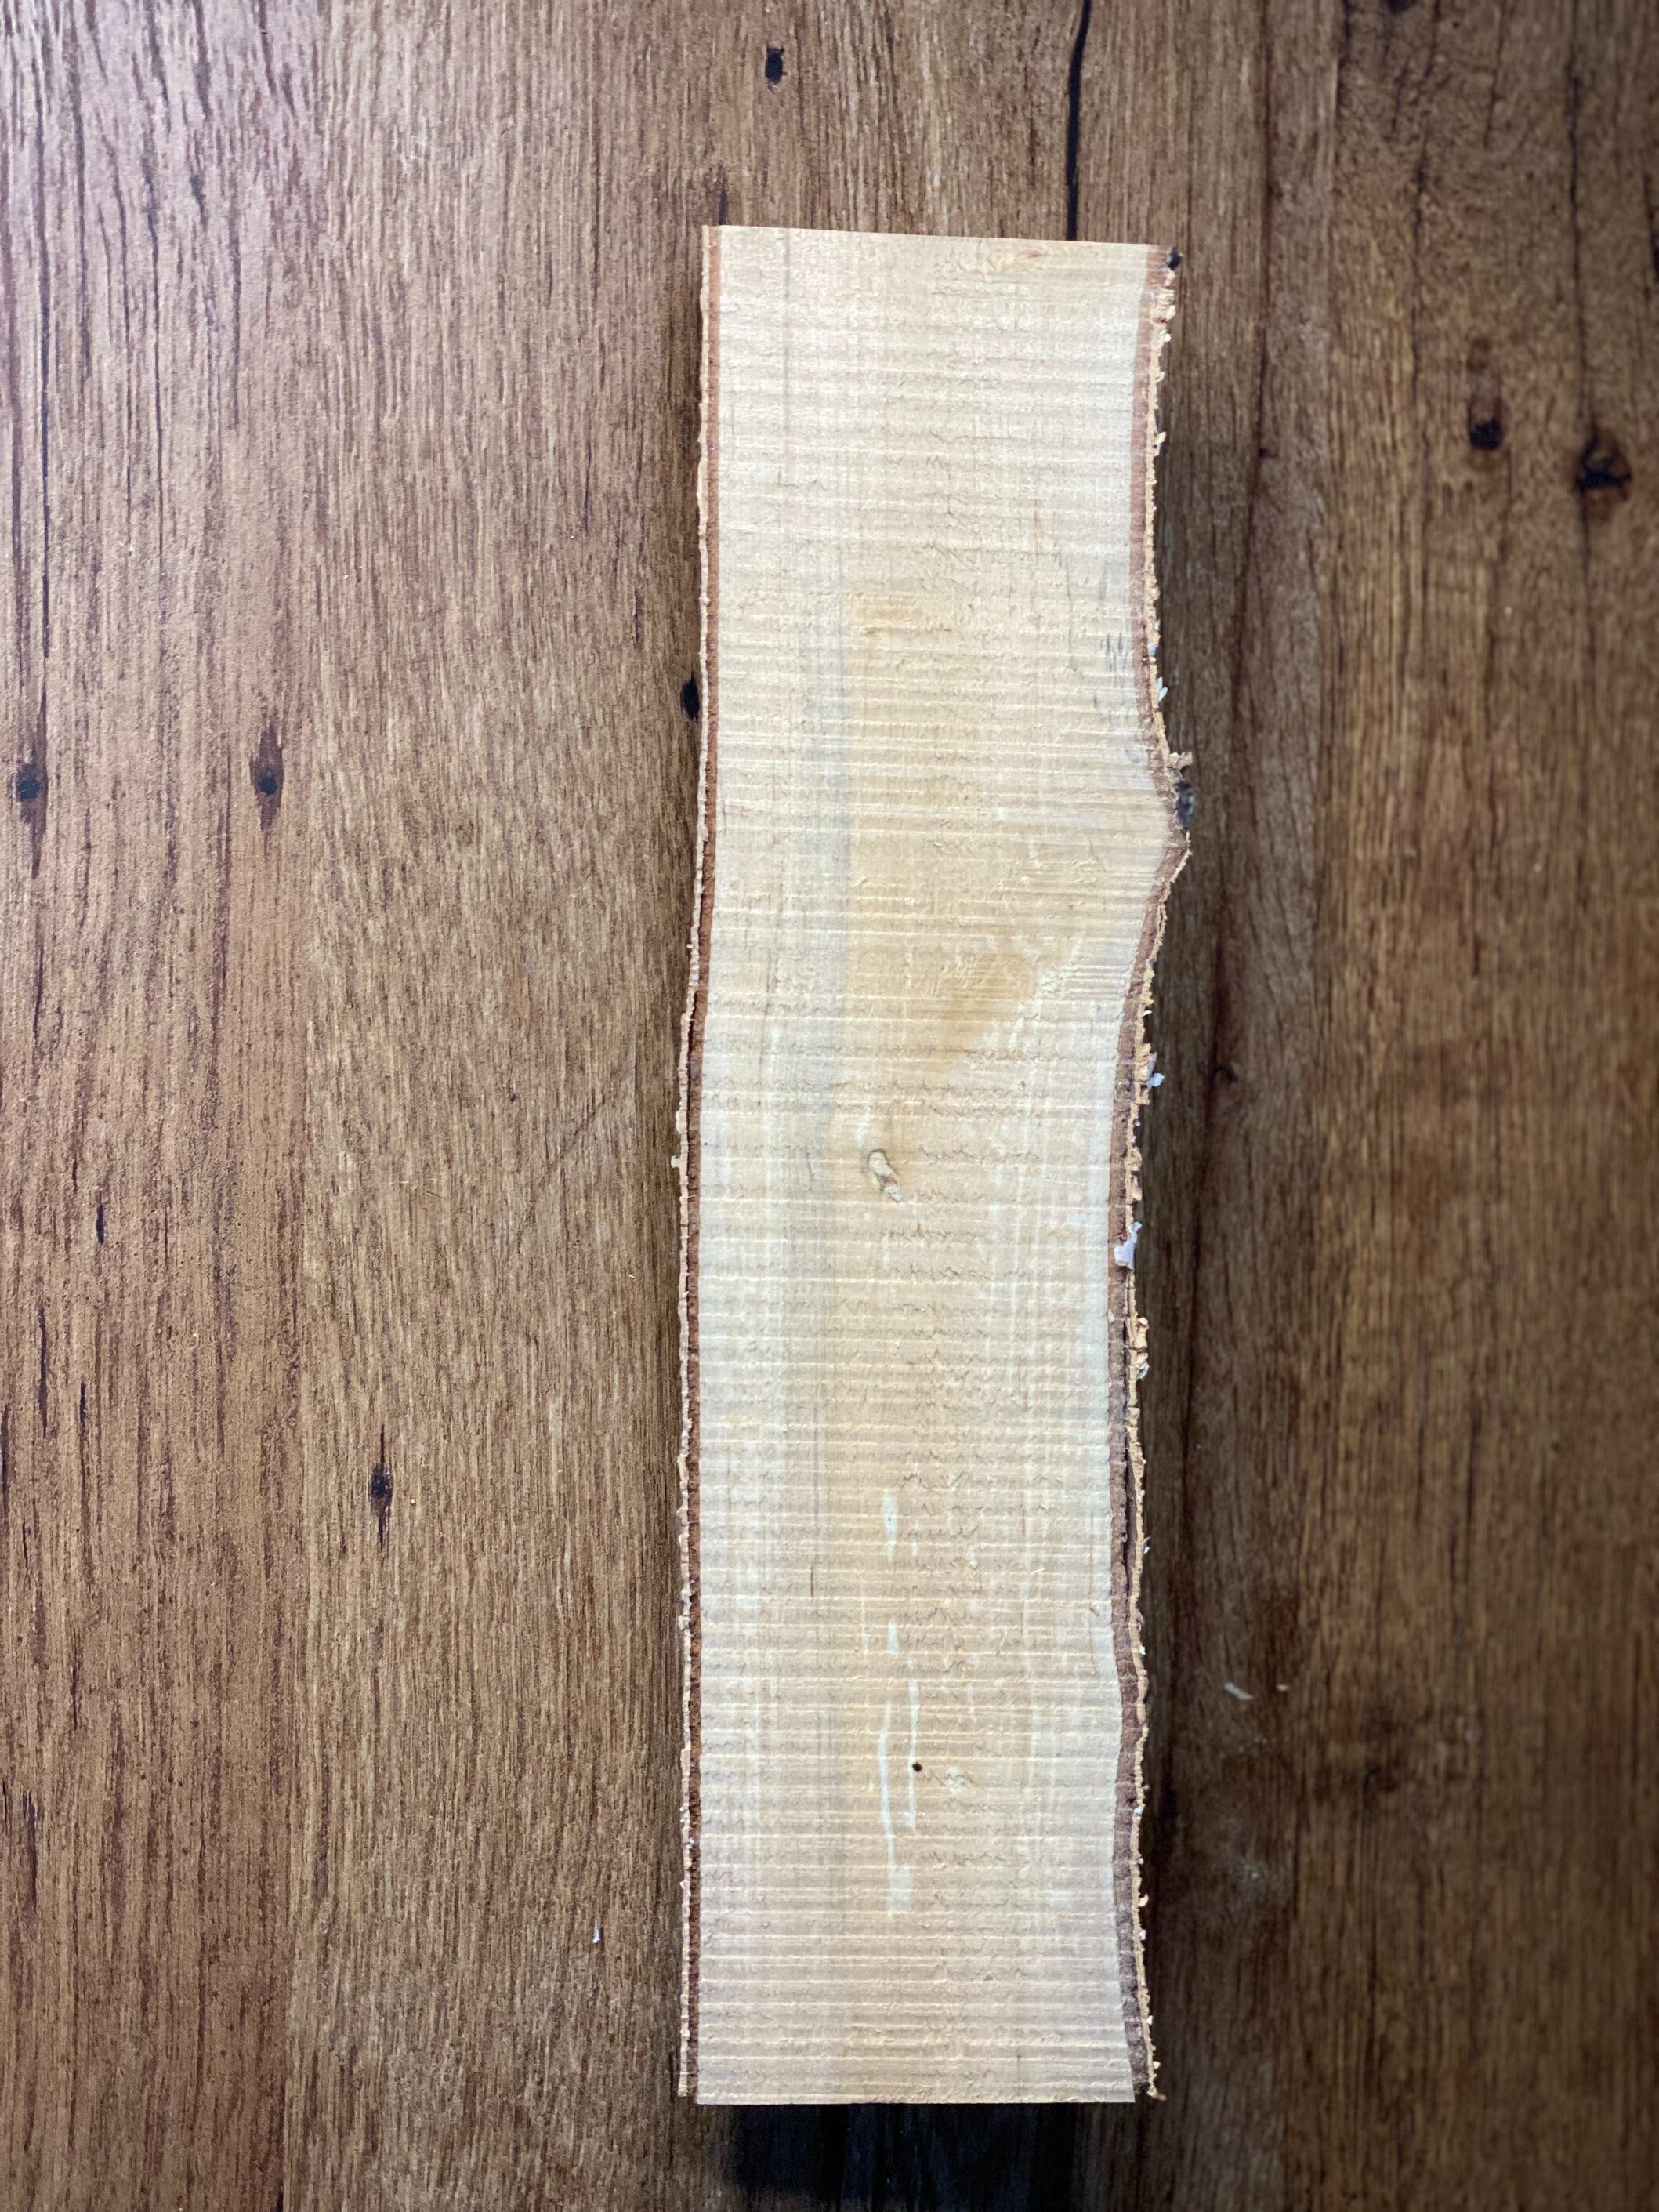 White Birch Half Log, Birch Slab, About 12 Inches Long by 3 Inches Wide and 1.5 Inches Thick